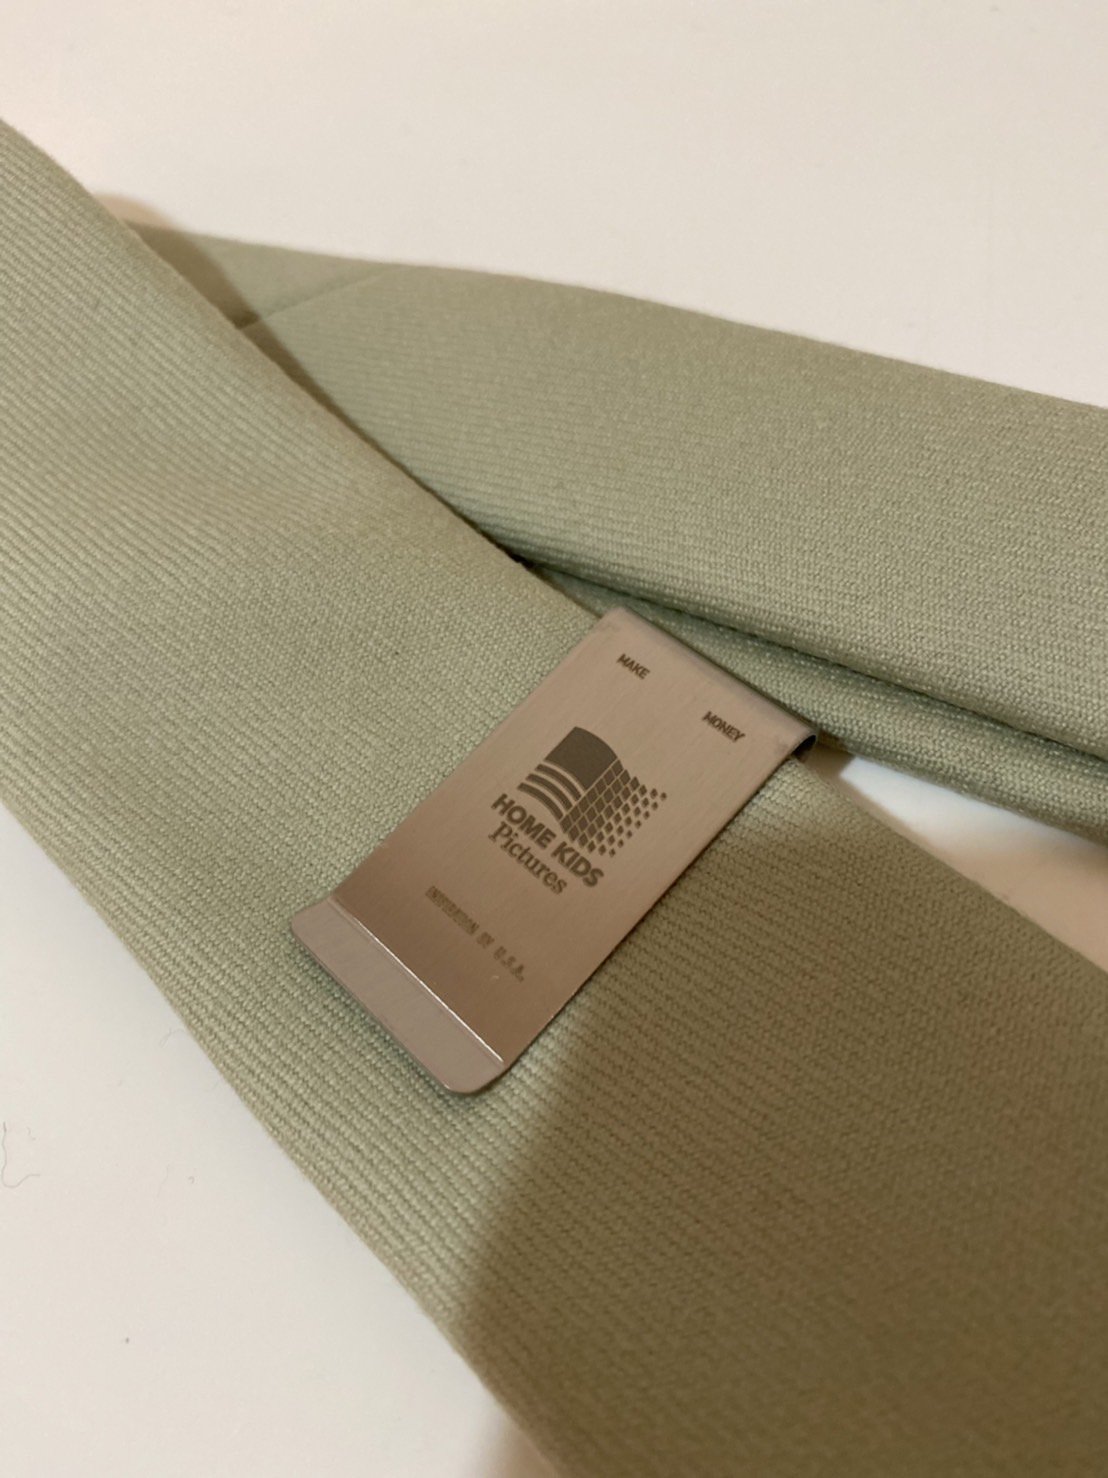 DAIRIKU<br />Wool Tie with Money Clip / Mint Green<img class='new_mark_img2' src='https://img.shop-pro.jp/img/new/icons14.gif' style='border:none;display:inline;margin:0px;padding:0px;width:auto;' />